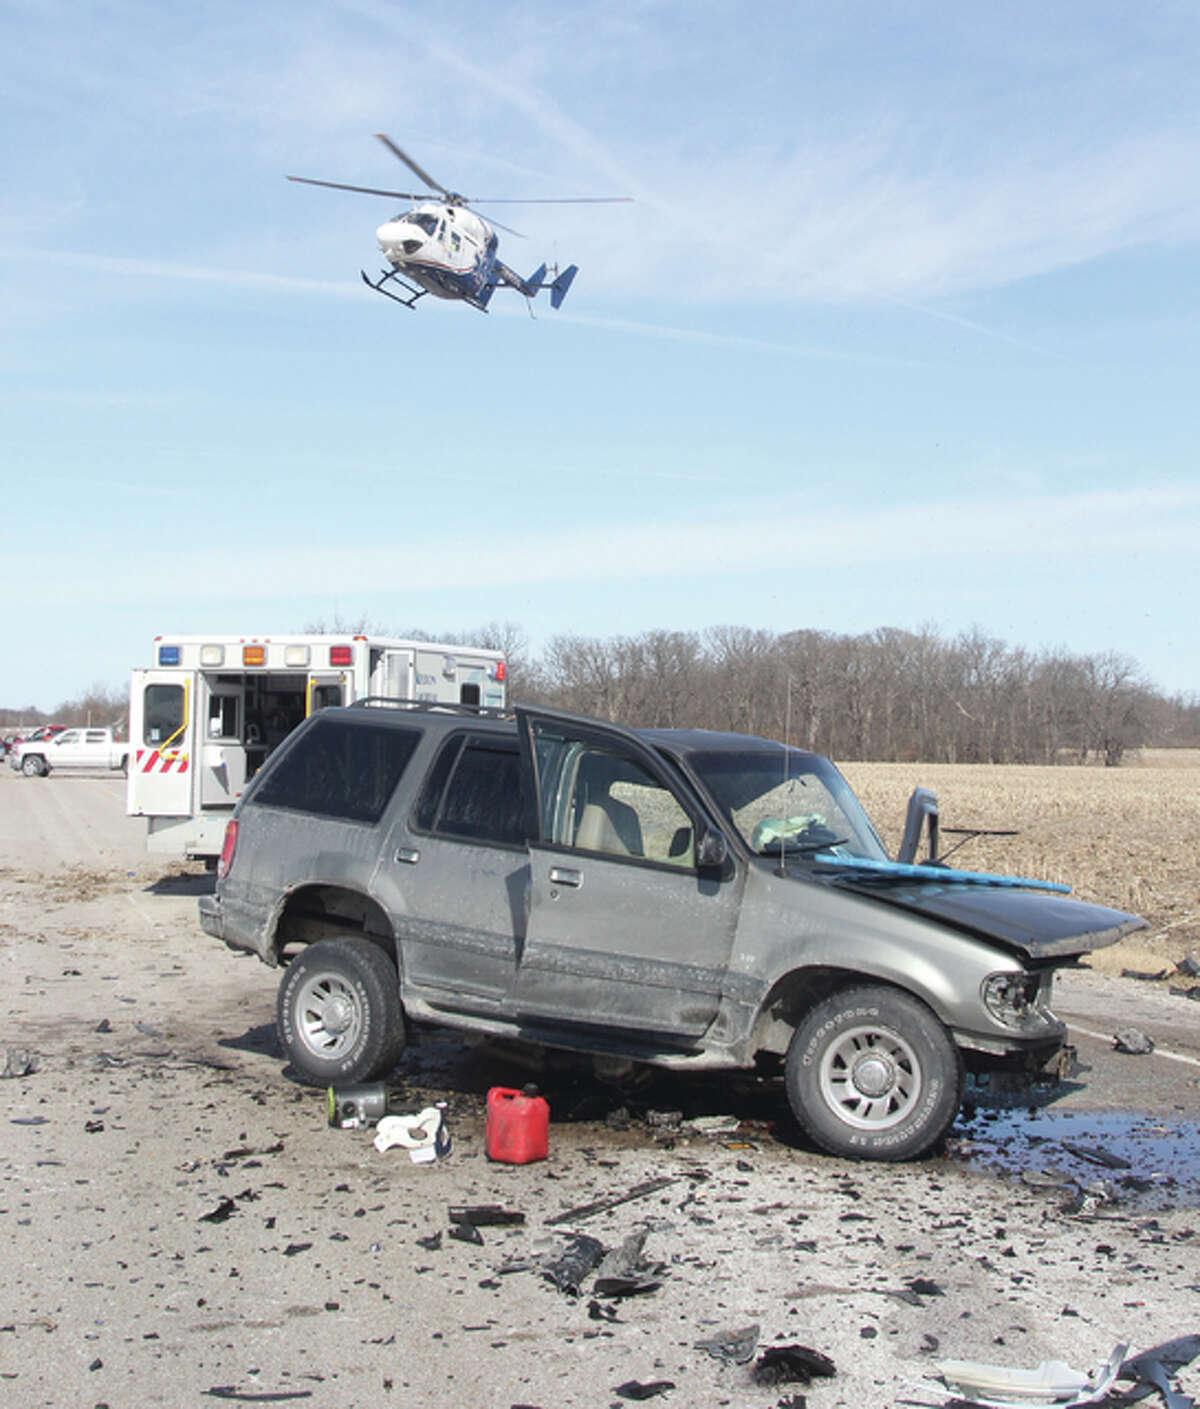 A helicopter takes off from the scene of a head-on collision on Fosterburg Road early Saturday afternoon.